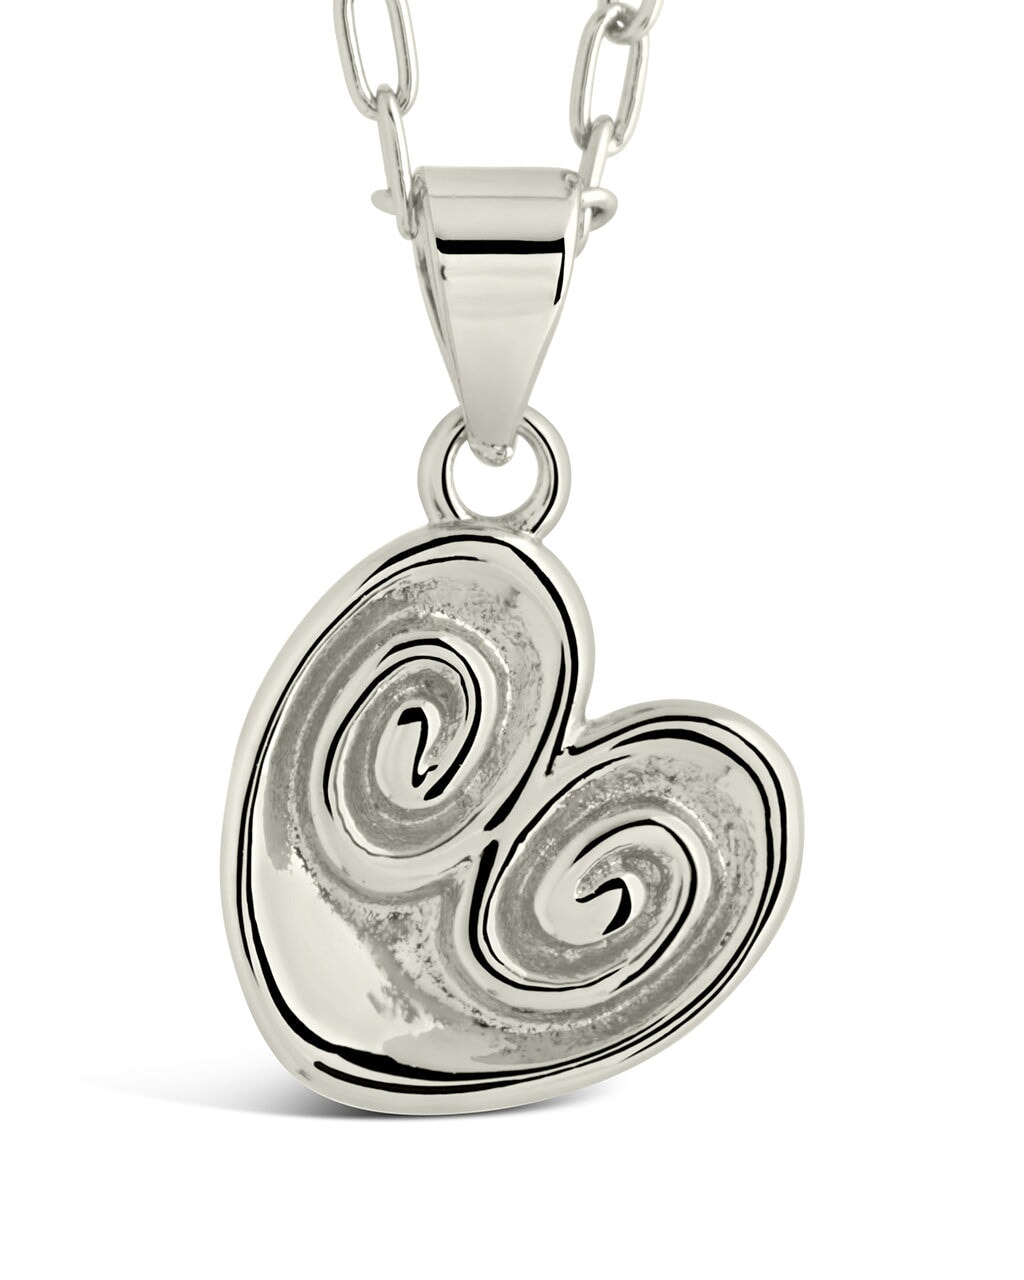 Palmier Pendant Necklace Necklace Sterling Forever Silver 